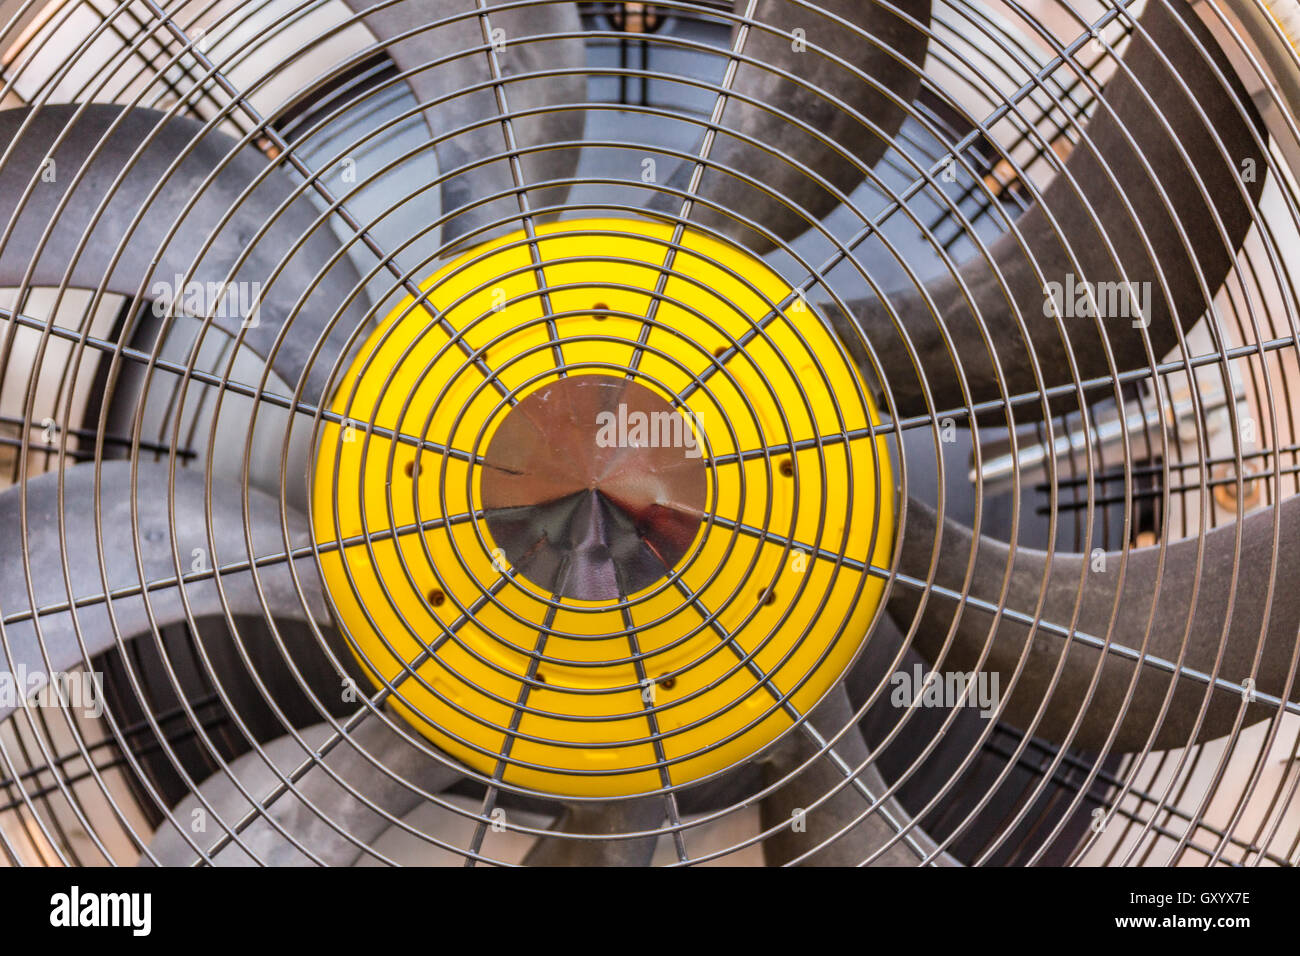 agricultural machine atomizer fan Stock Photo